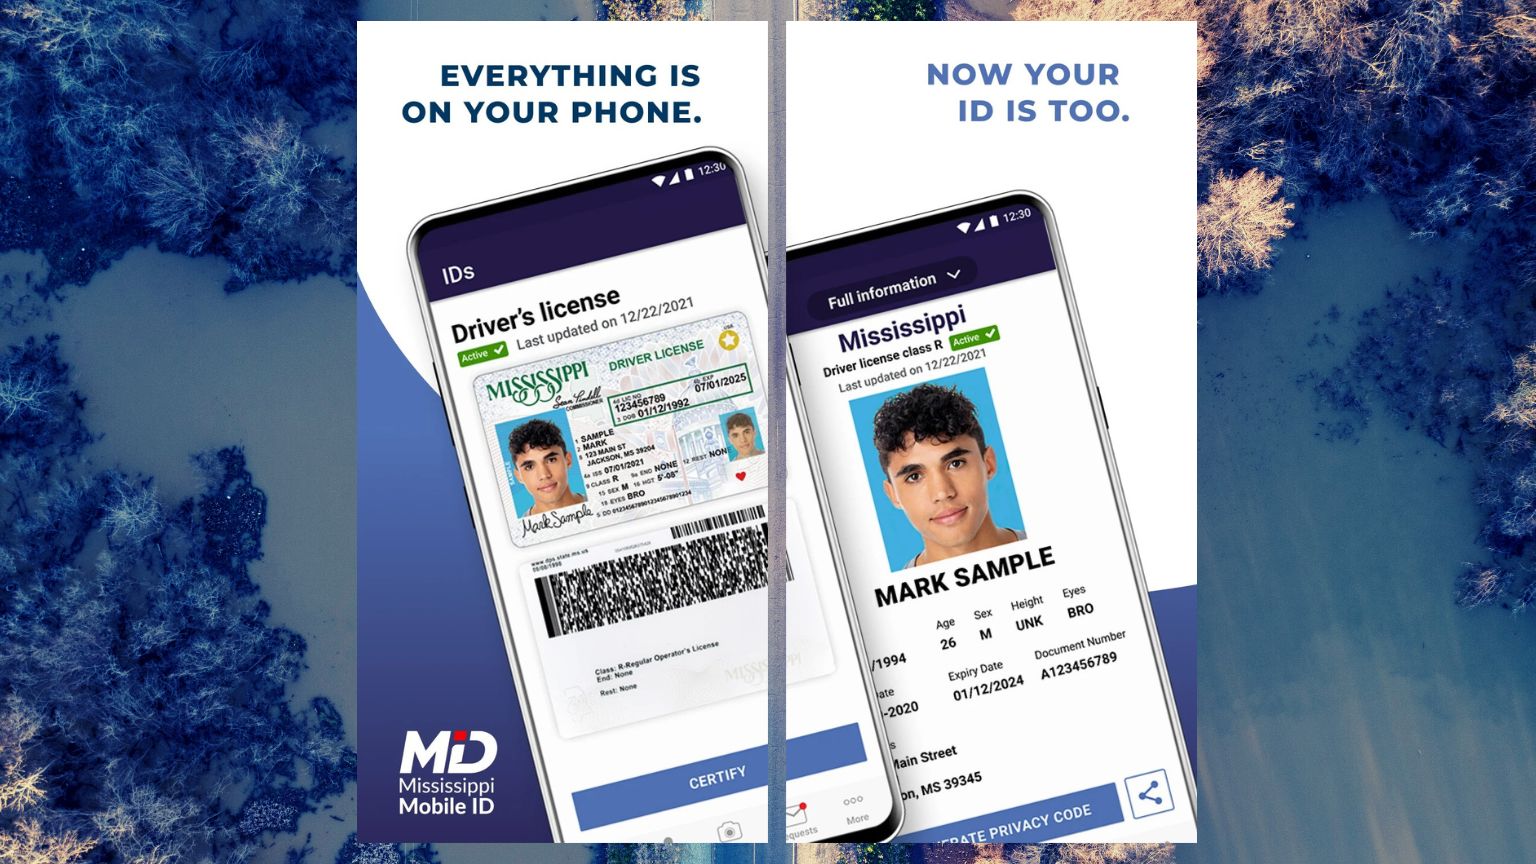 Mississippi pushes digital driver’s licenses as a form of digital ID